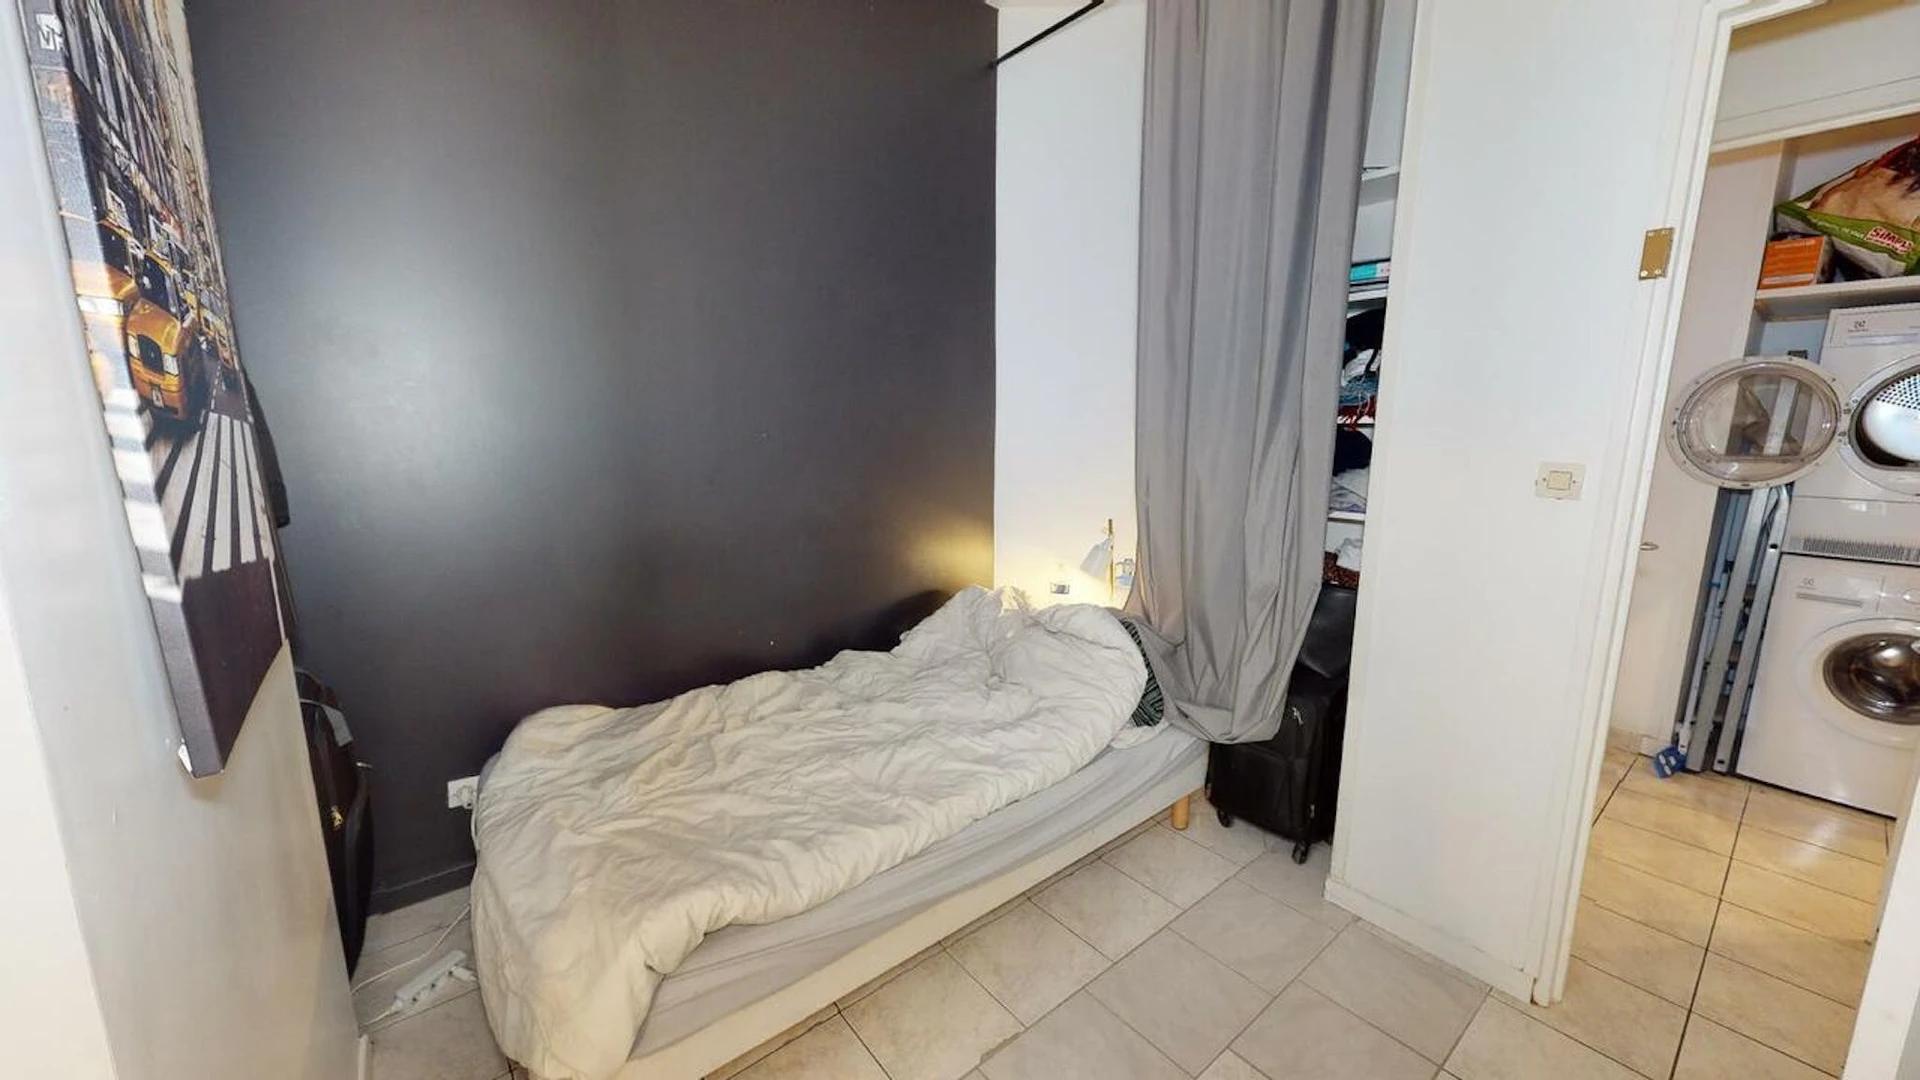 Room for rent in a shared flat in le-havre